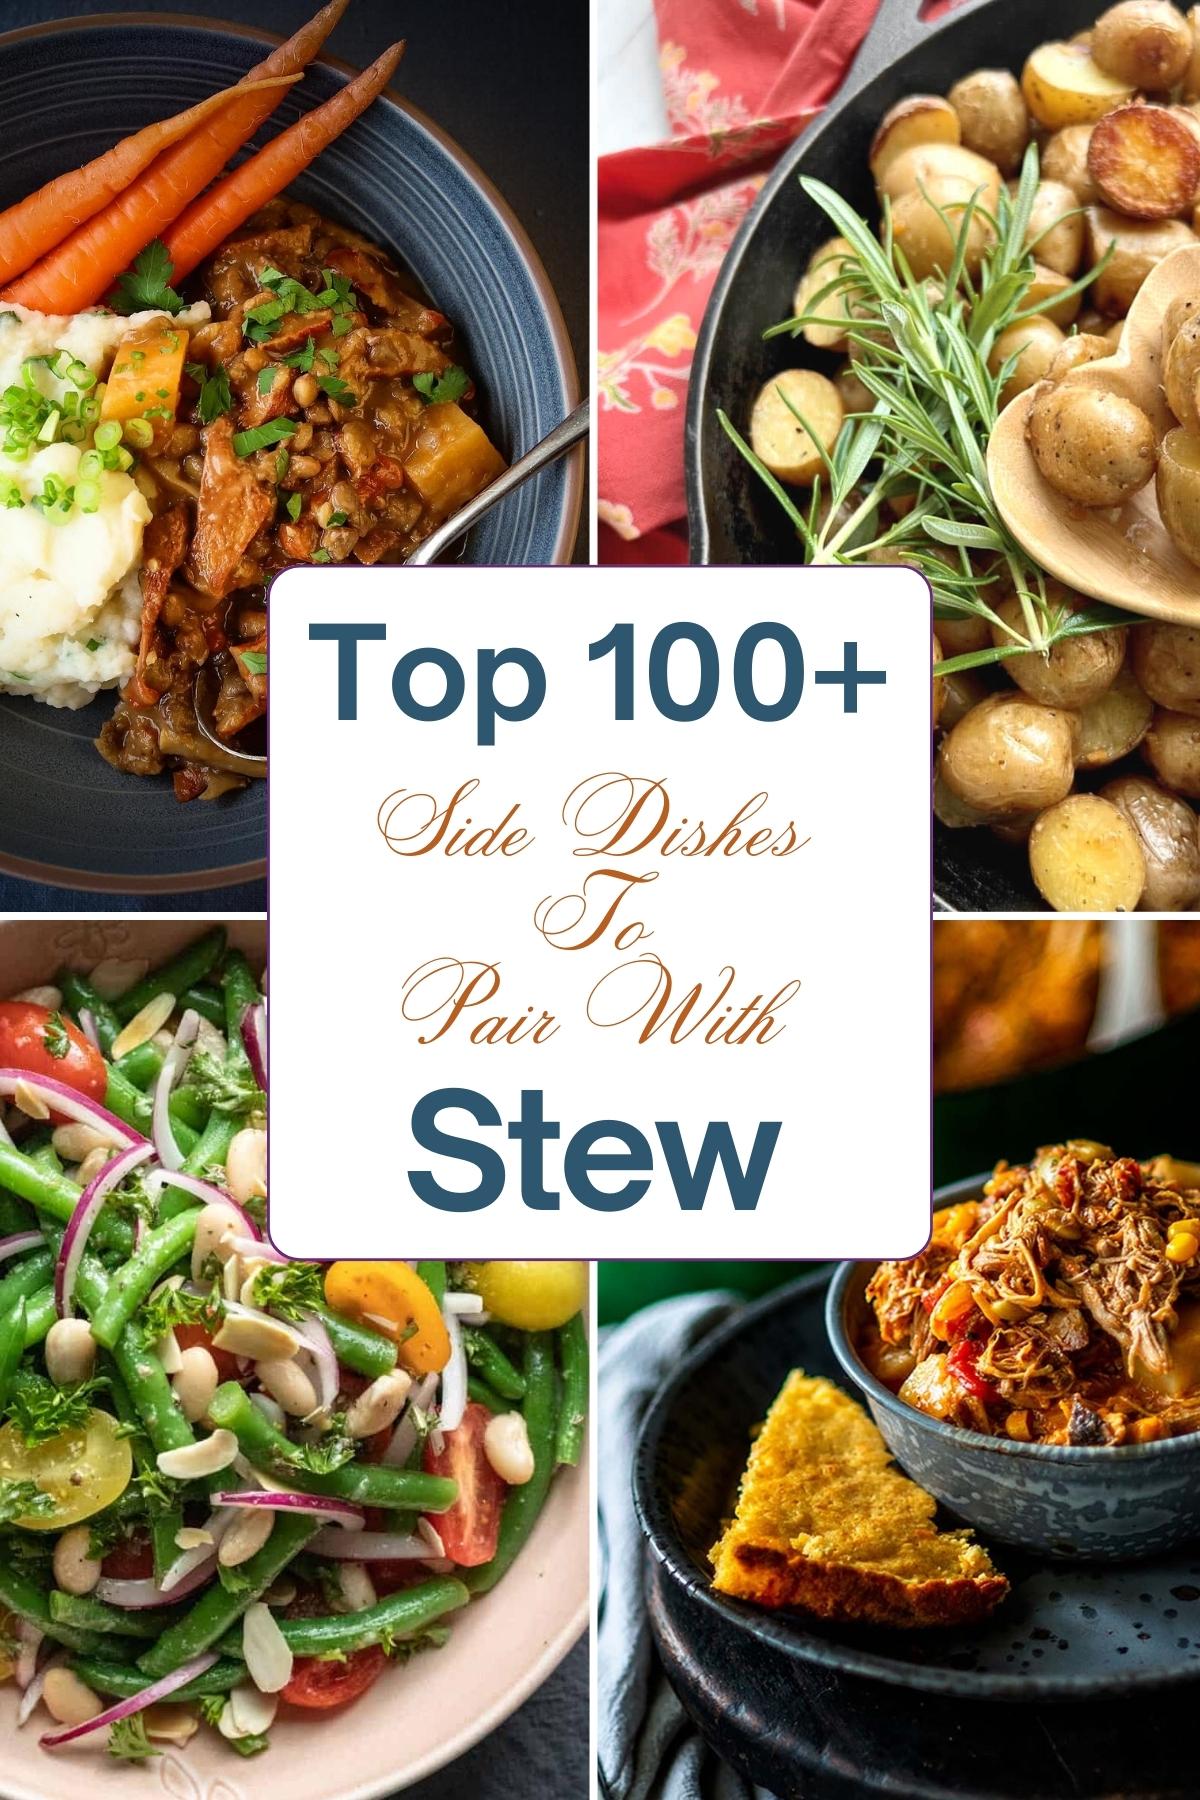 Collage of stew, roast potatoes, green bean salad and stew with a triangular piece of toast with title, "Top 100+ side dishes to serve with stew", in the middle.